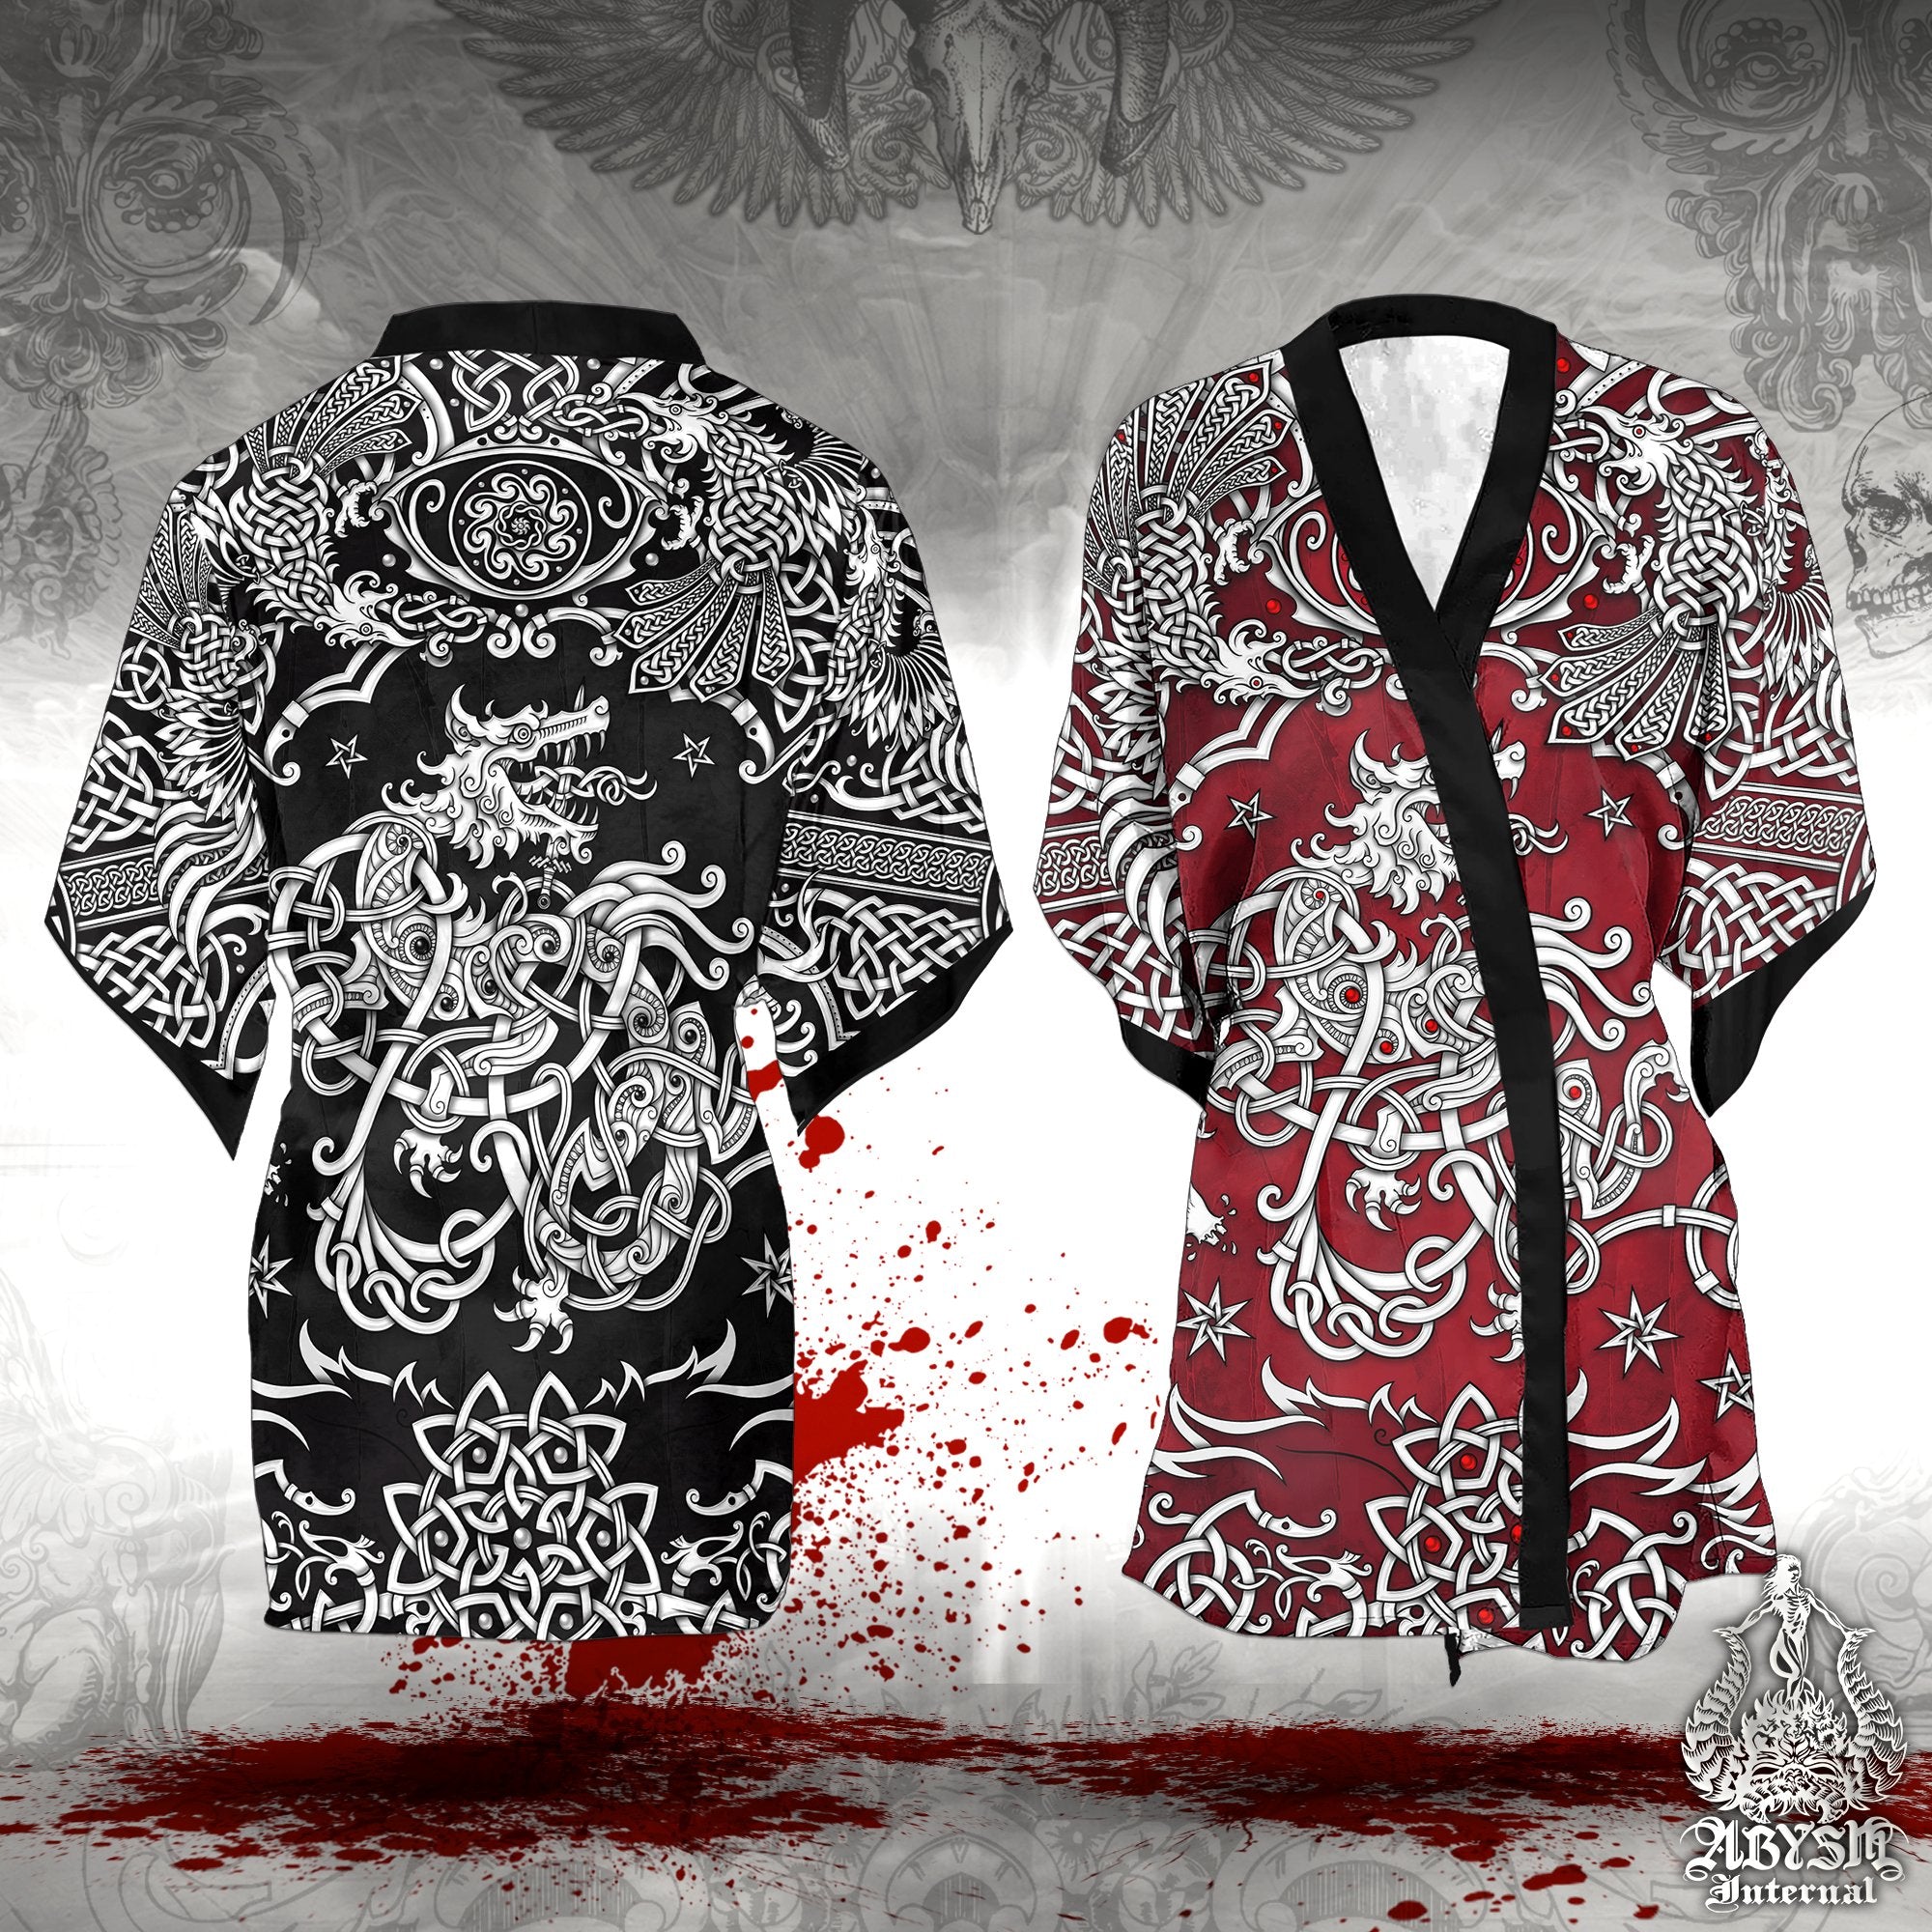 Fenrir Short Kimono Robe, Beach Party Outfit, Viking Wolf Coverup, Alternative Festival, Summer Clothing, Unisex - 3 Colors: Black, Red, Blue - Abysm Internal